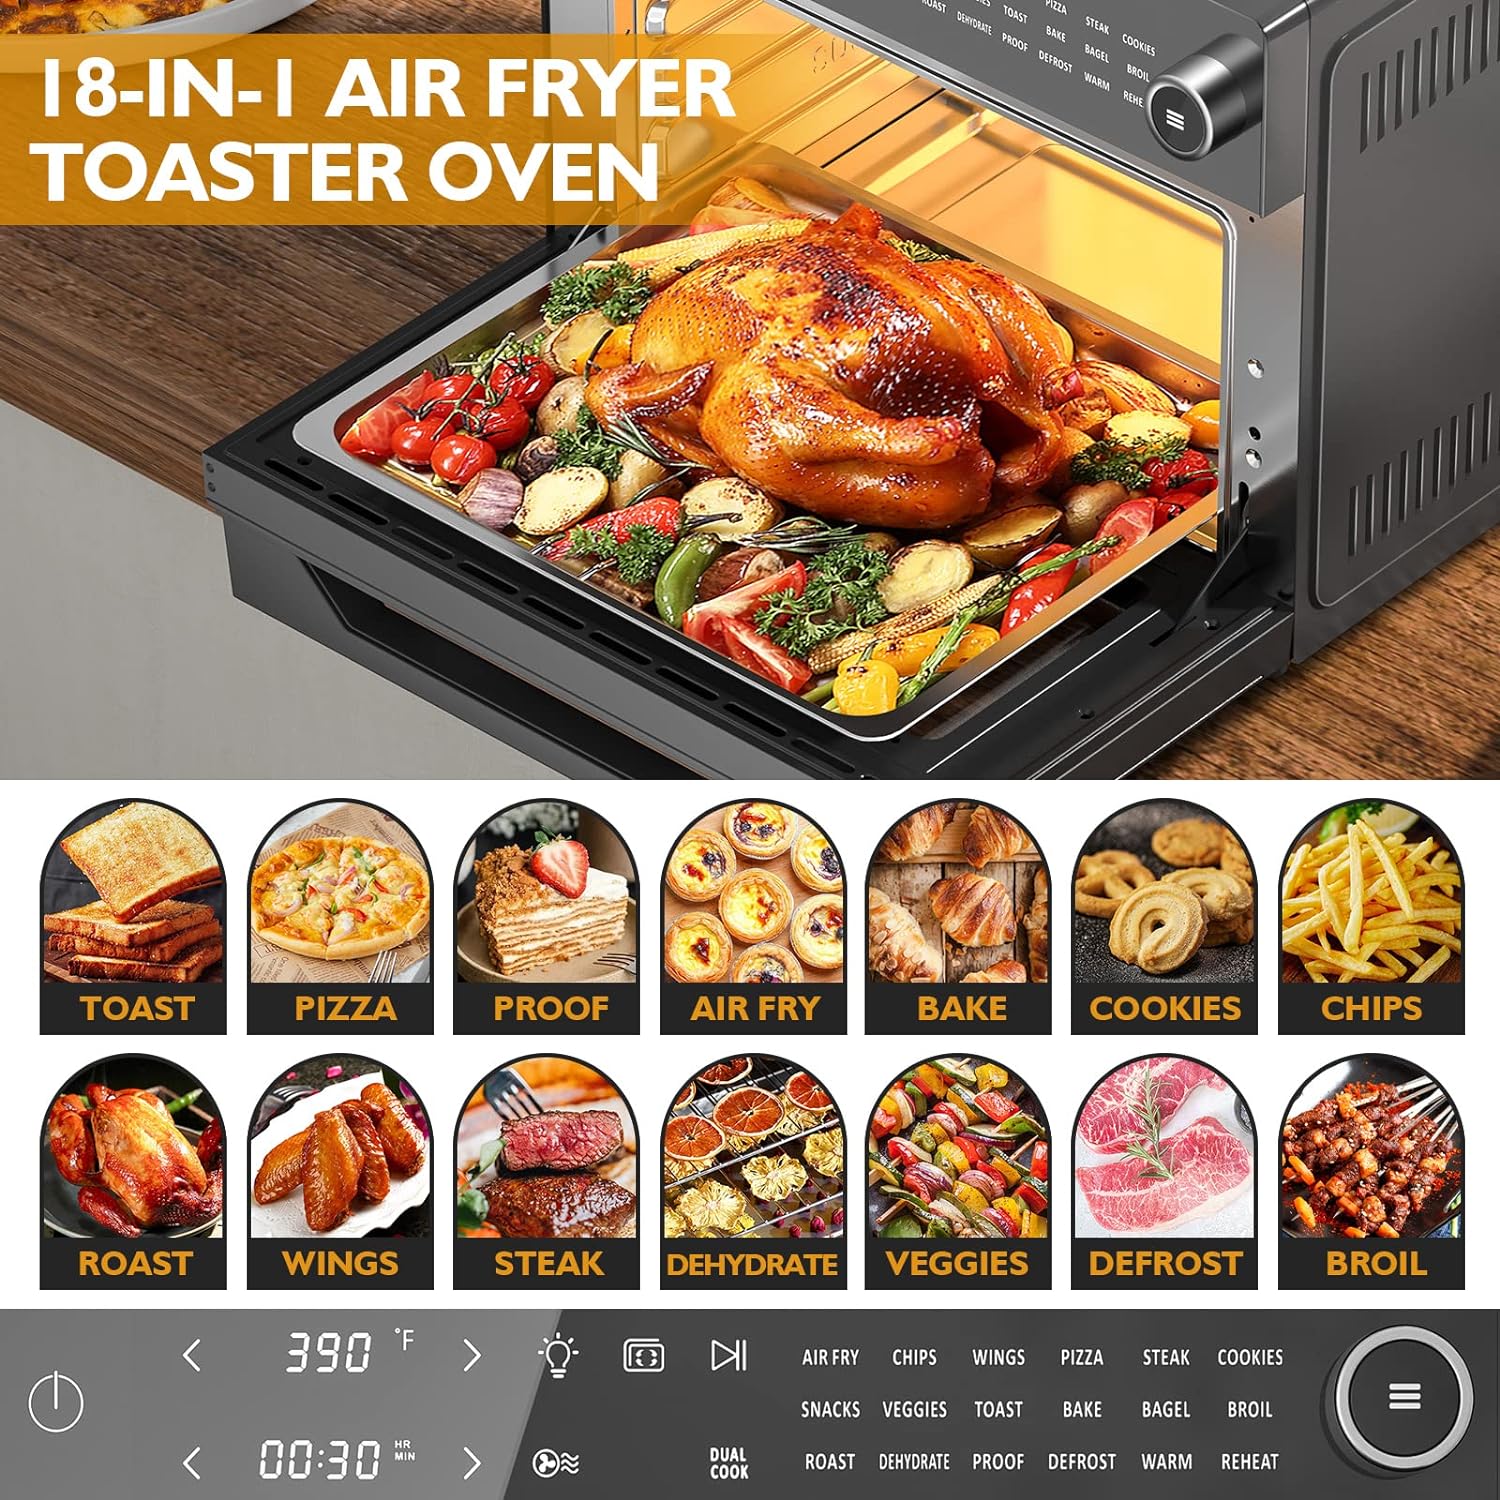 comfee CO-F25A1 Toaster Oven Air Fryer Combo User Guide